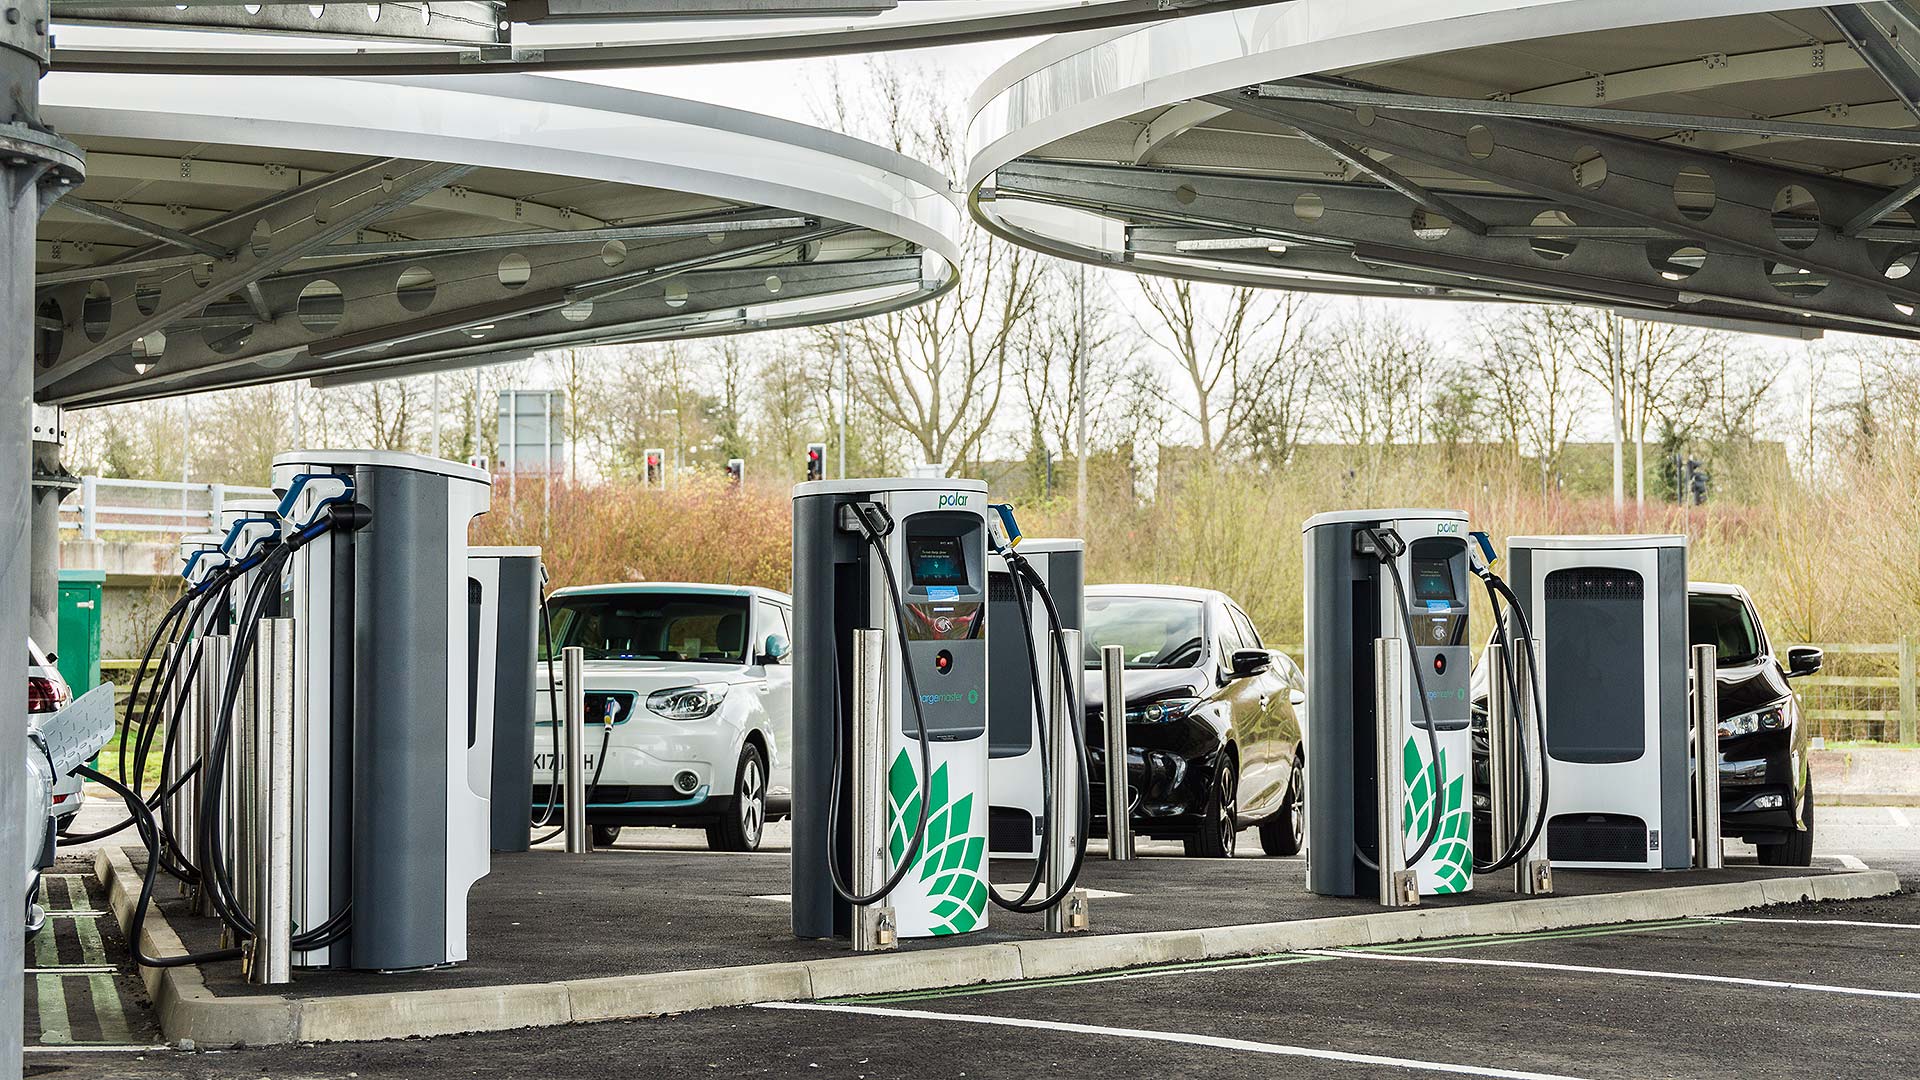 A beginners’ guide to electric car charge points